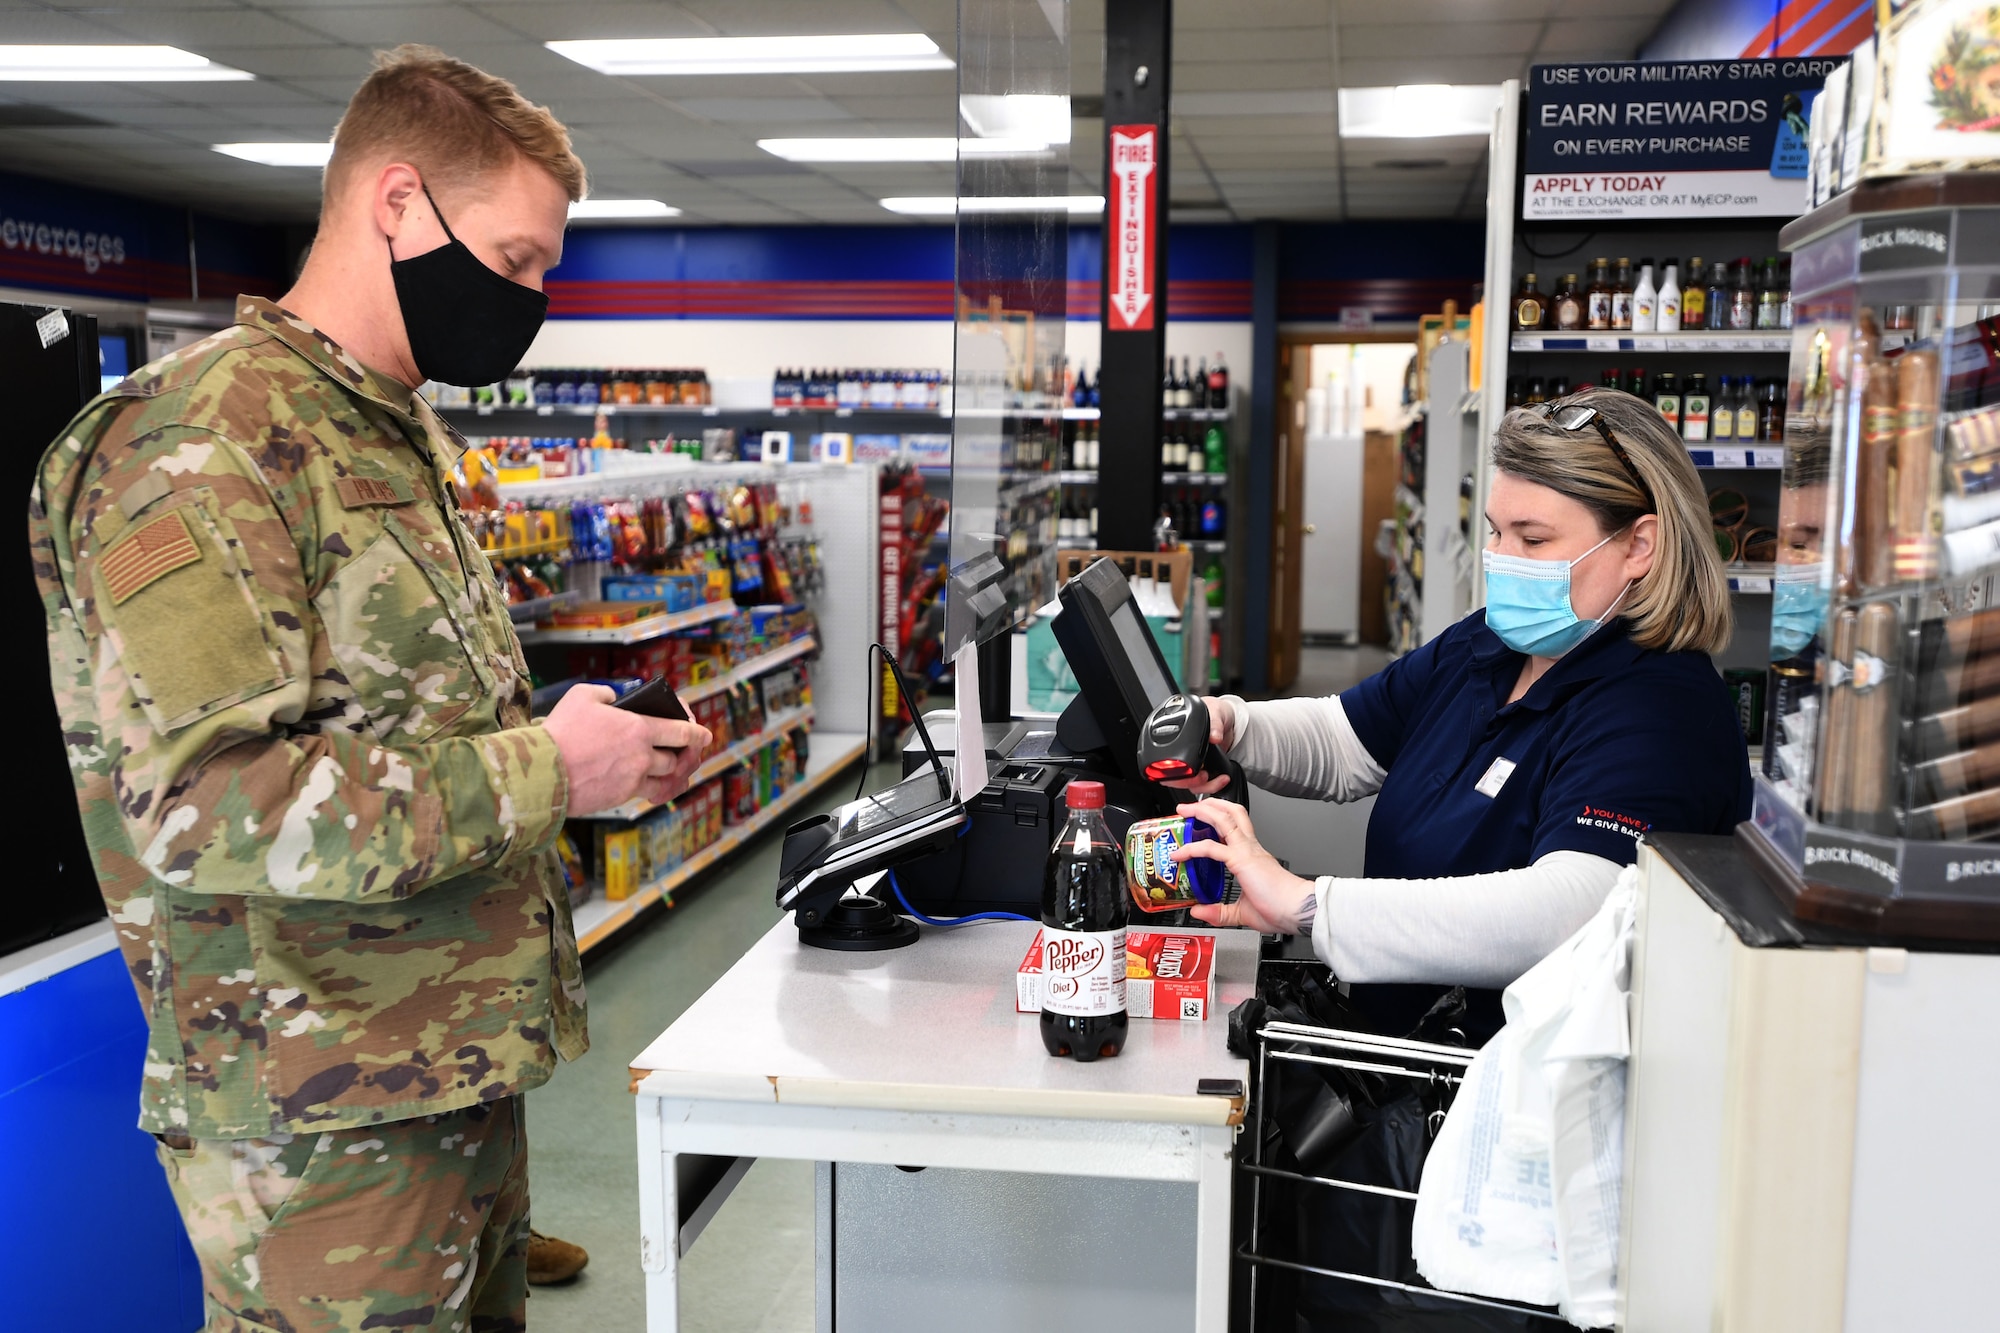 Jennifer Britton, Shoppette Store Manager, assists North Carolina Air National Guardsmen (NCANG) at the Shoppette cash register while they take a break from work to buy snacks and drinks at the NCANG Base, Charlotte Douglas International Airport, Dec. 3, 2020. After 14 years of serving Airmen, the Base Shoppette is set to close on December 11, 2020 with plans to possibly re-open after the COVID-19 pandemic subsides.